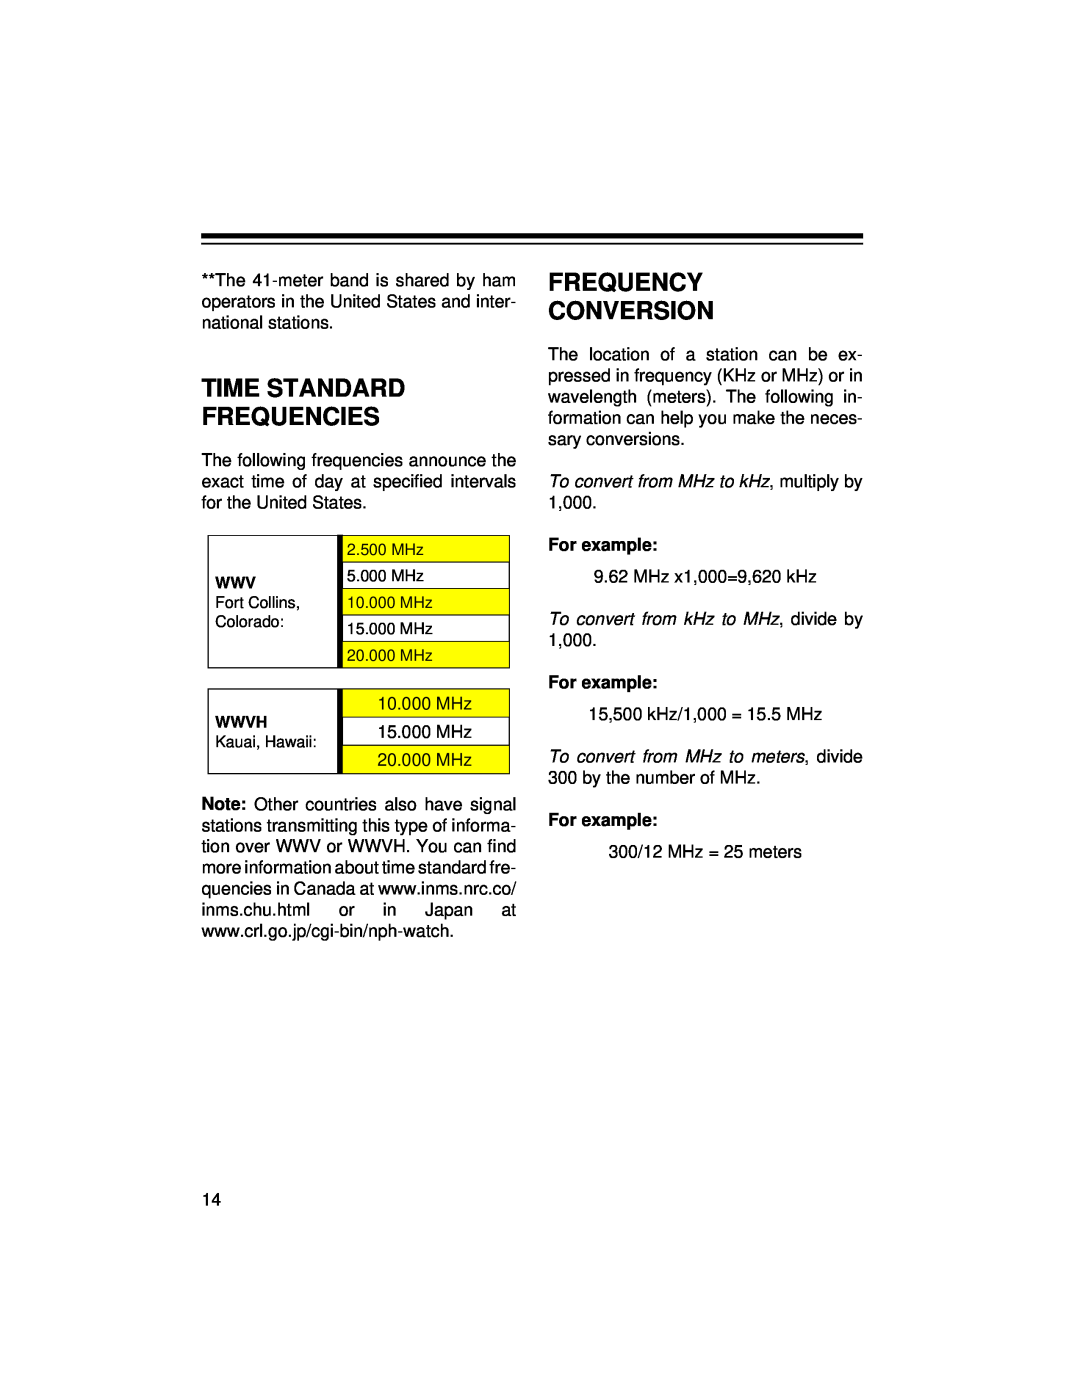 Radio Shack DX-396 owner manual Time Standard Frequencies, Frequency Conversion, For example 